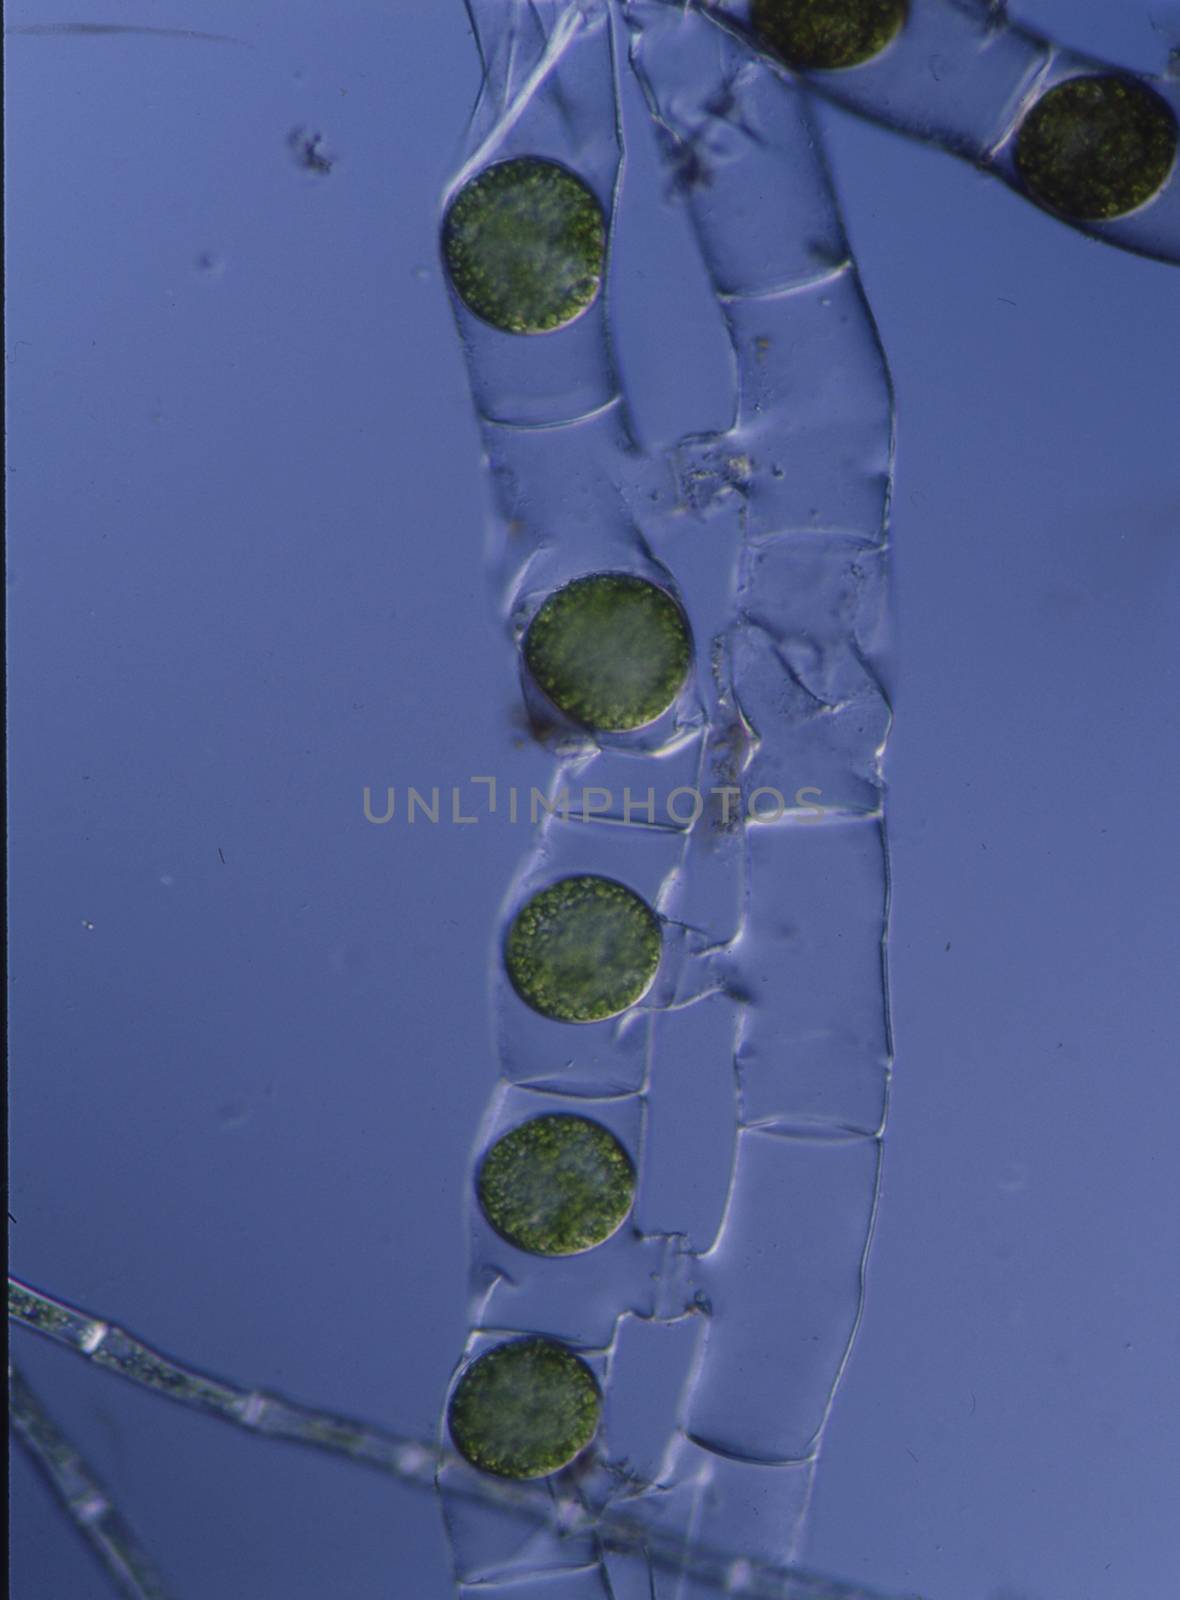 elongated green algae in the water under the microscope